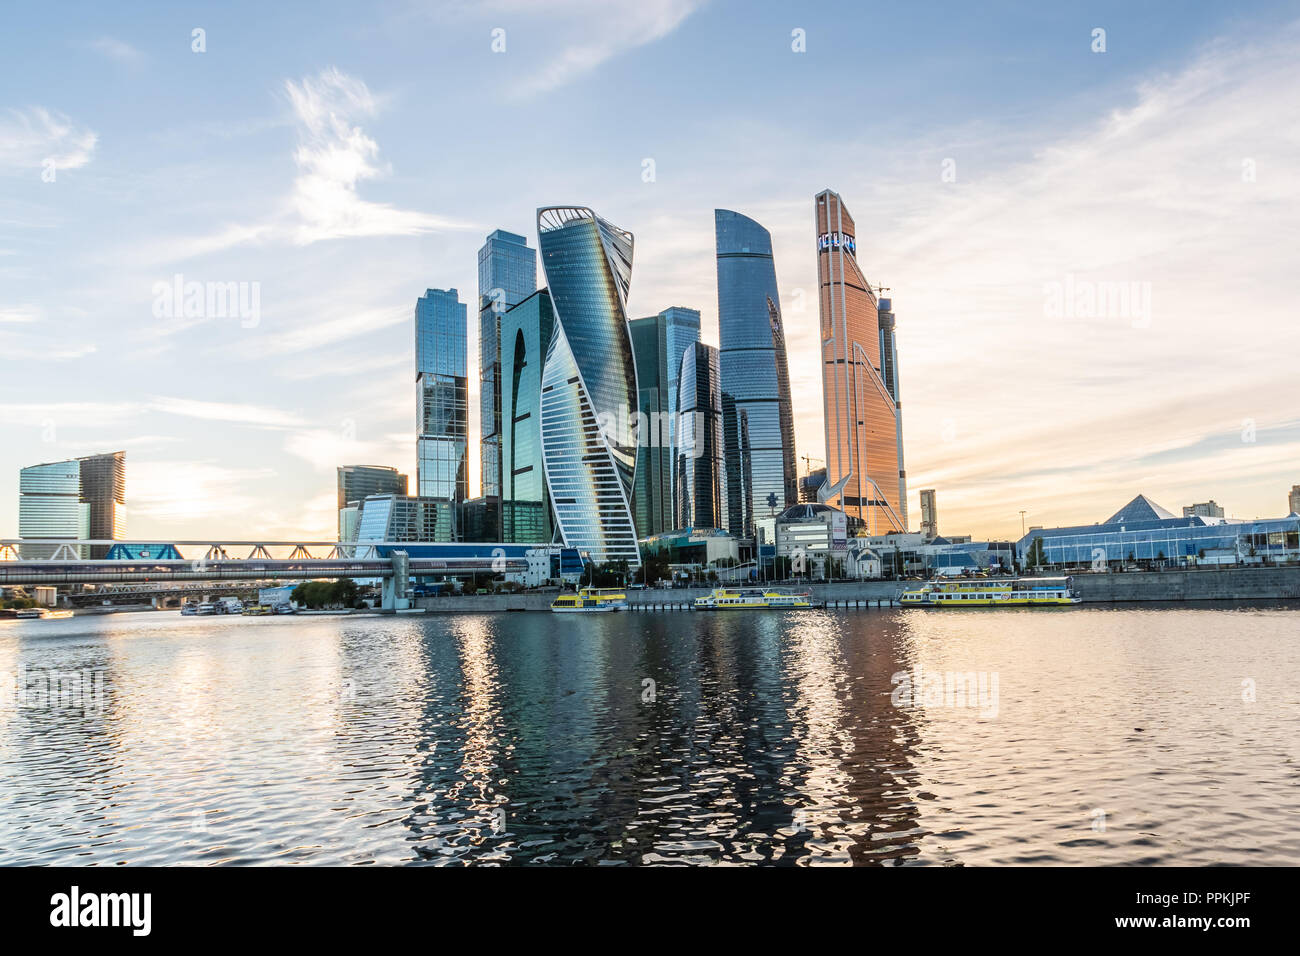 Russia; Moscow- September 13, 2018: Skyscrapers of Moscow city - Moscow International Business Center in downtown of Moscow and Bagration bridge. Stock Photo